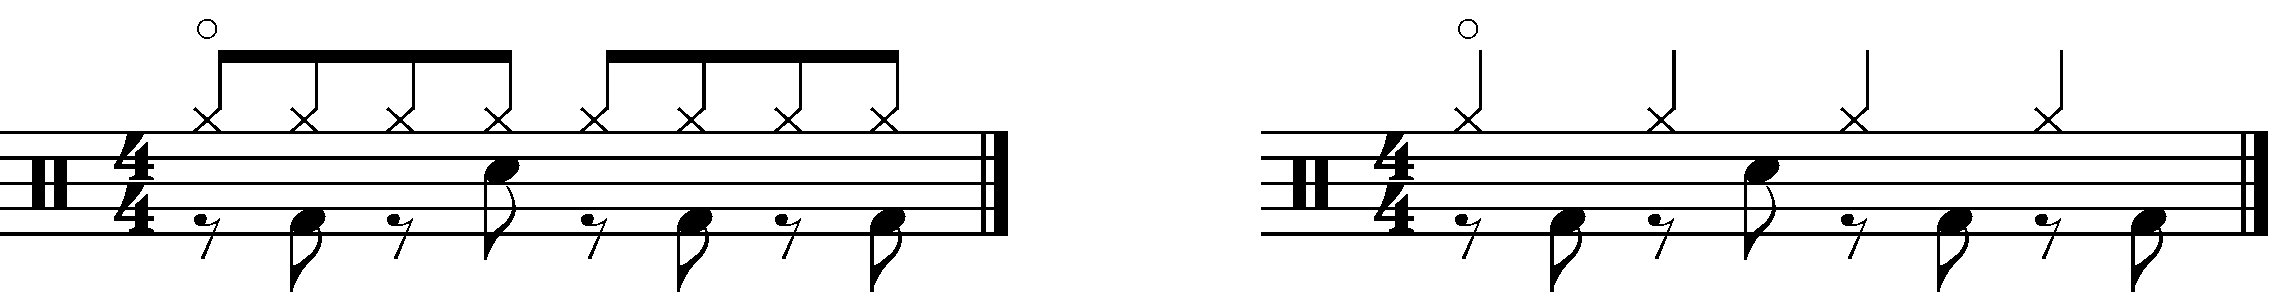 A an eighth note kick snare pattern avoiding the quarter notes